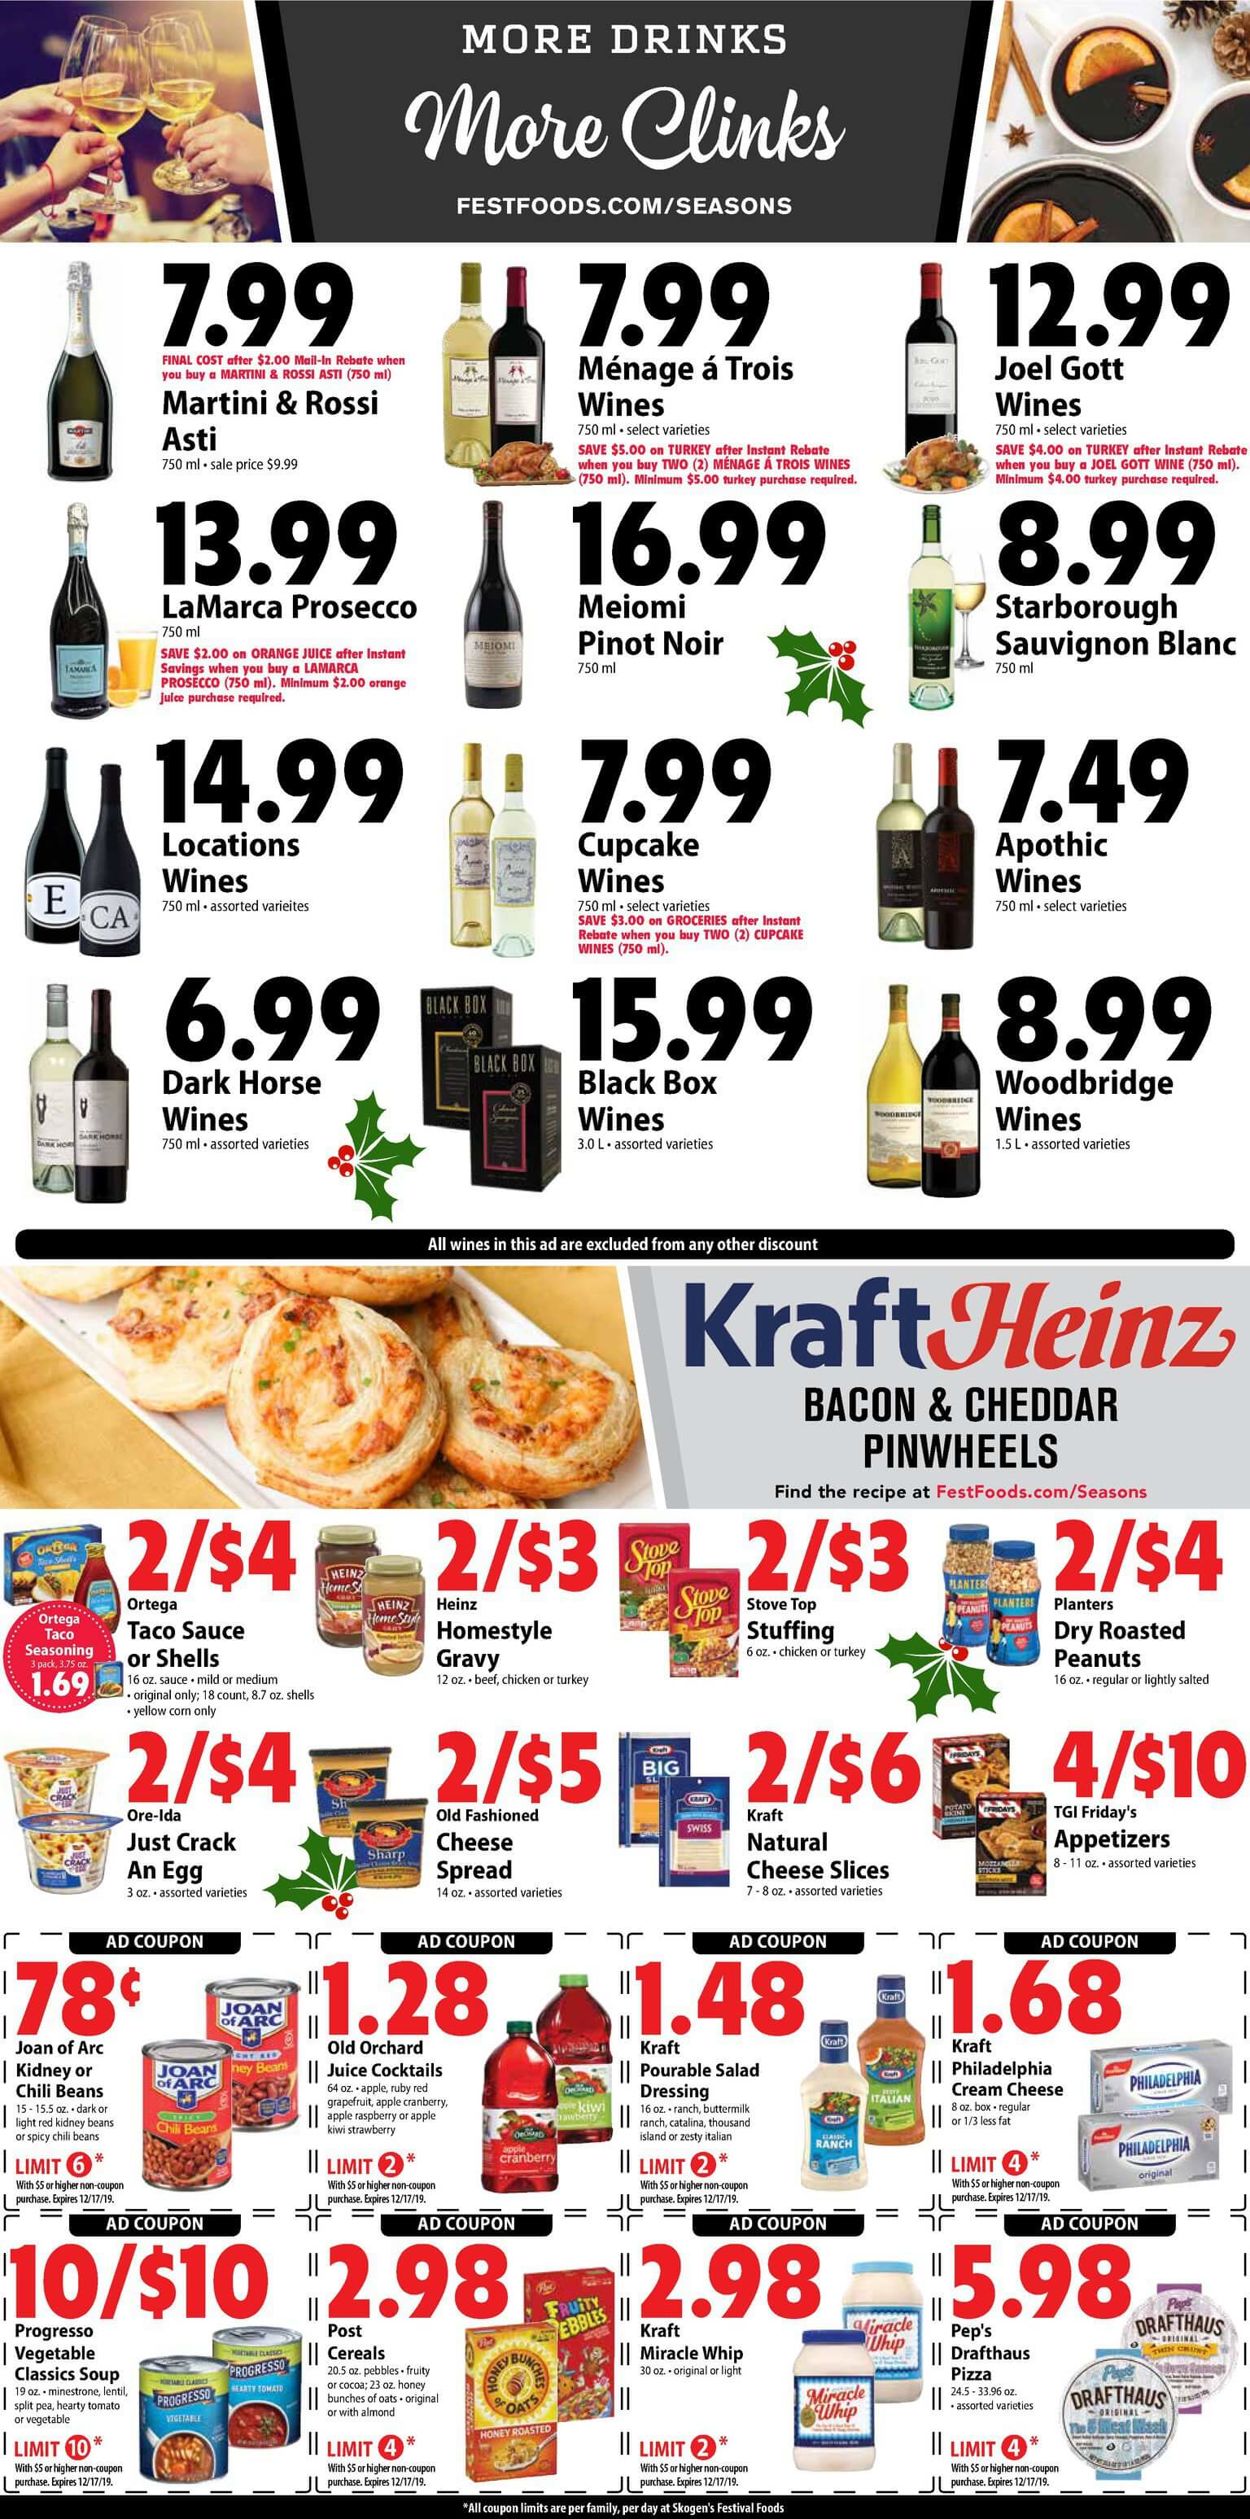 Festival Foods - Christmas Ad 2019 Weekly Ad Circular - valid 12/11-12/17/2019 (Page 9)